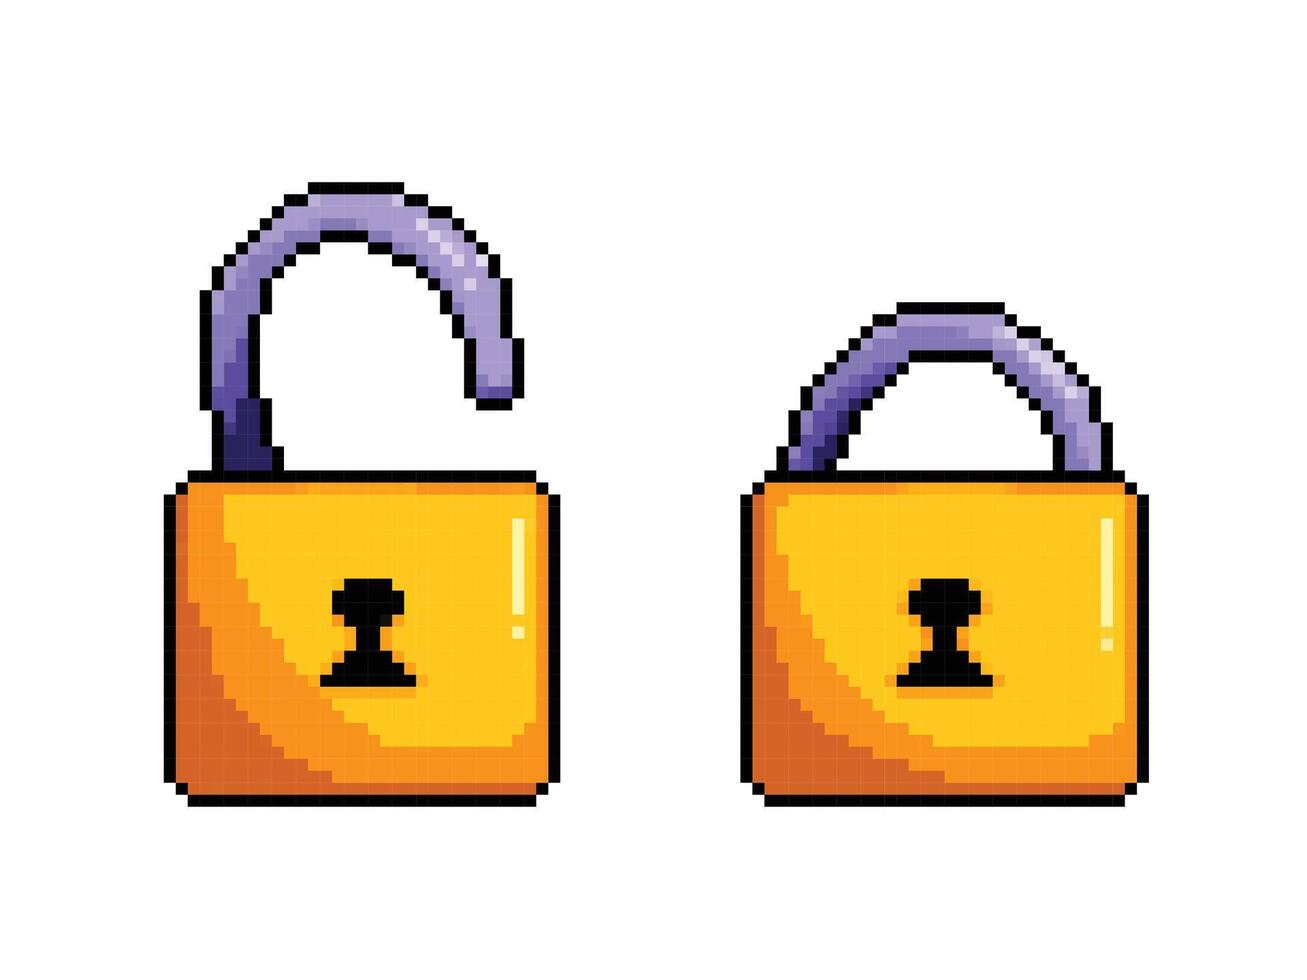 Opened and closed gold yellow padlock. Pixel art retro vintage video game bit vector illustration with simple flat cartoon art style isolated on horizontal white background.